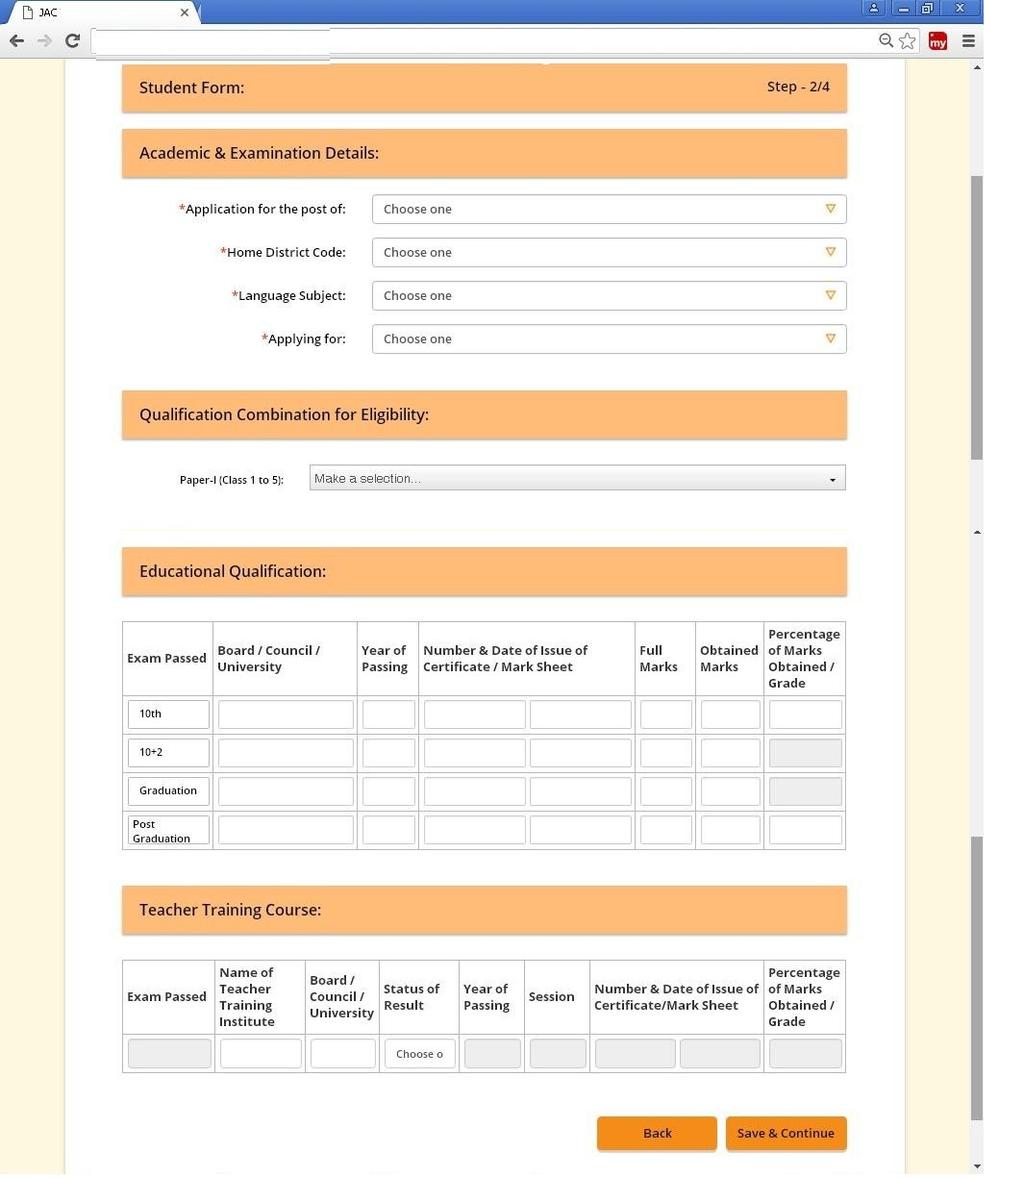 Academic Details Page (Student Form 2/4) : How to fill Academic Details : 1. Fill requisite information s in the page by entering them in the box provided (All fields in this page are mandatory). 2. In boxes having drop down tables chose one from the available list.